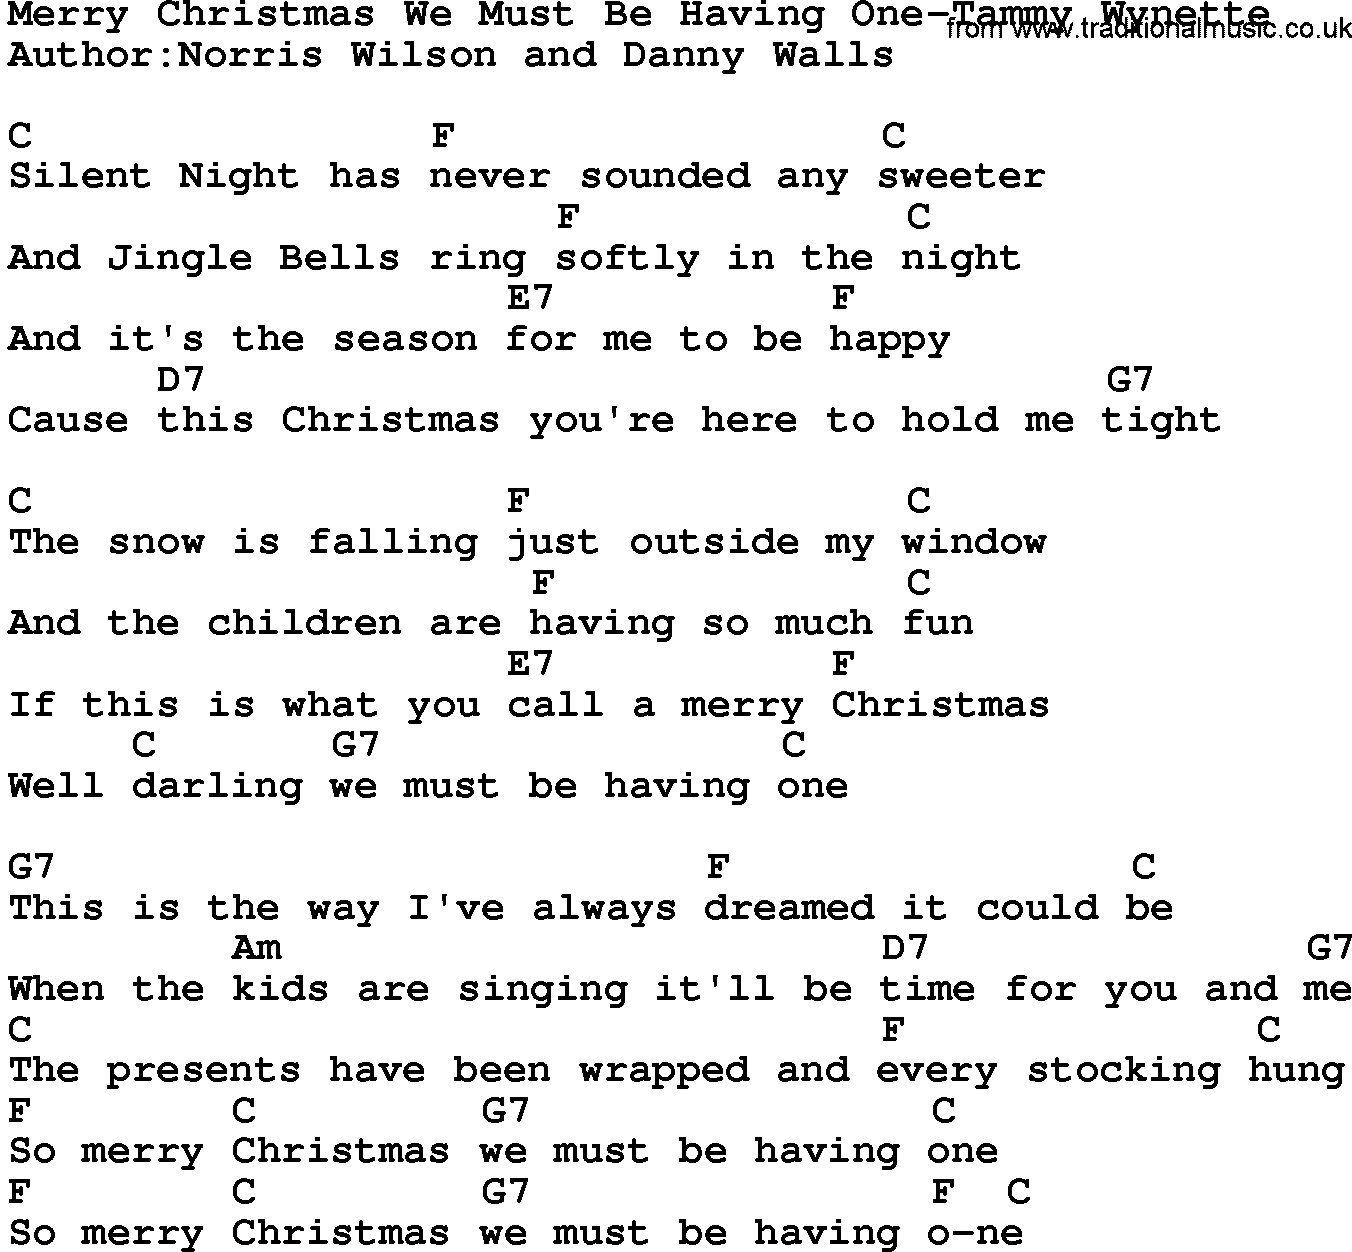 Country music song: Merry Christmas We Must Be Having One-Tammy Wynette lyrics and chords